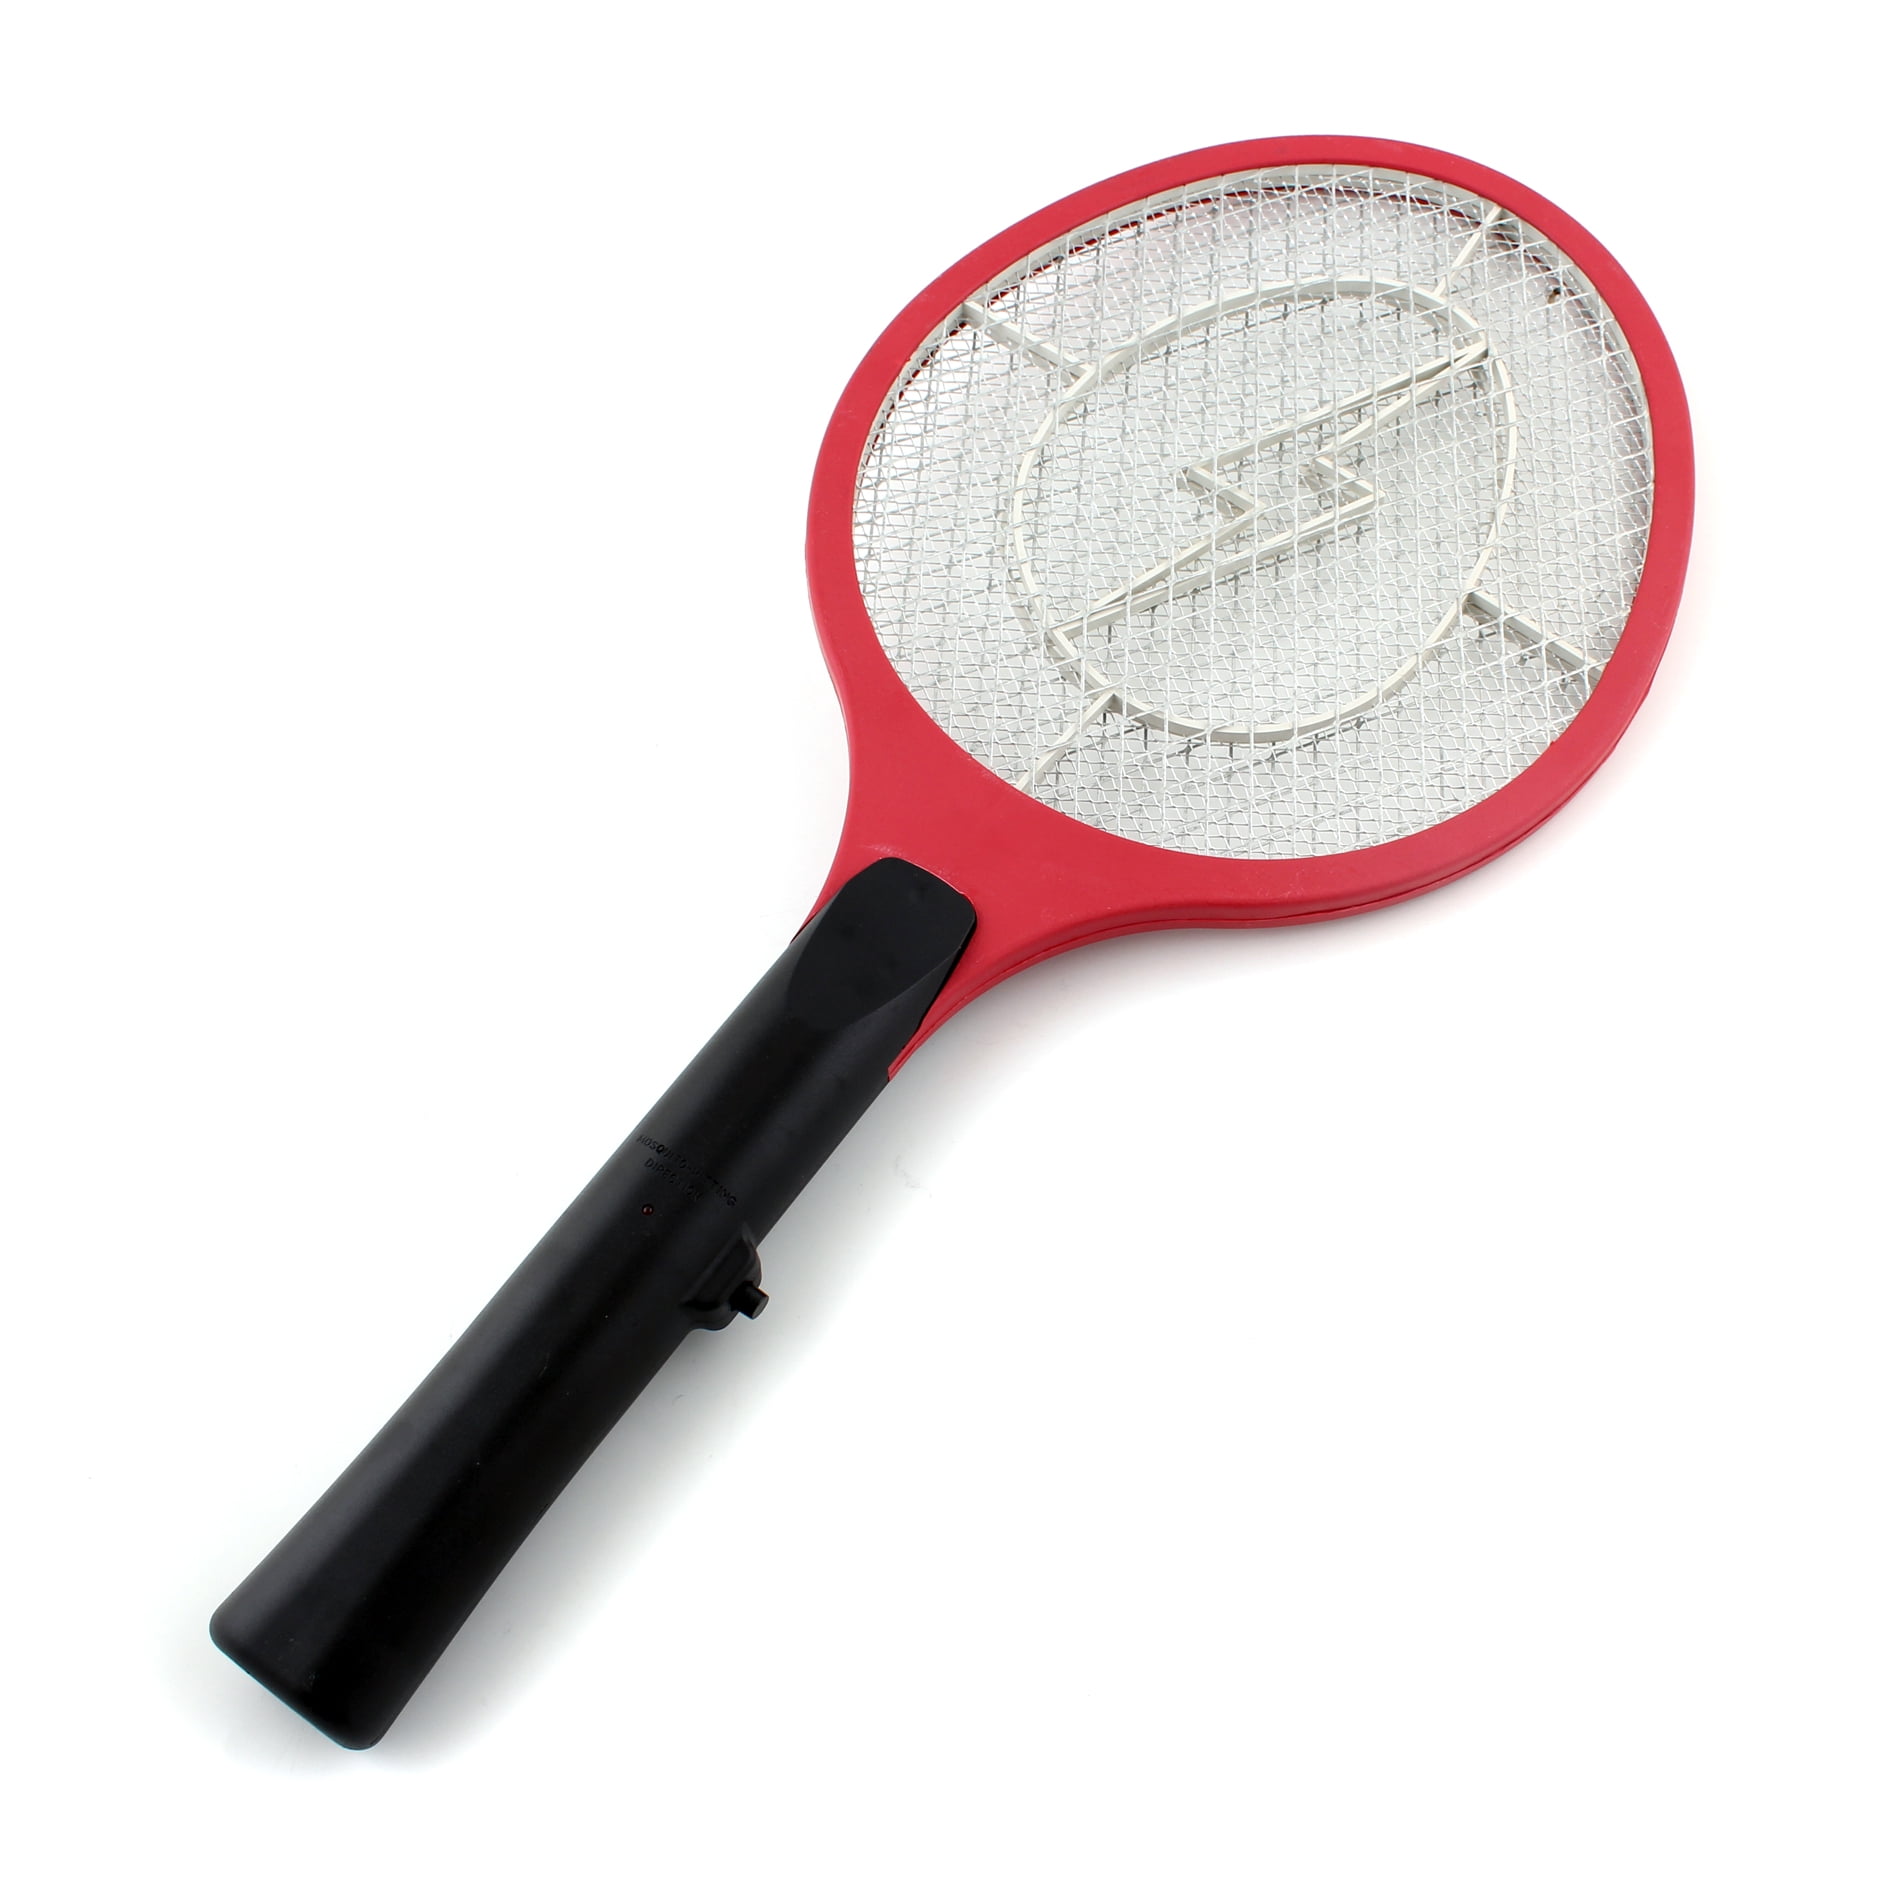 Cordless Electronic Bug Zapper Mosquito Insect Electric Fly Swatter Racket Bat 